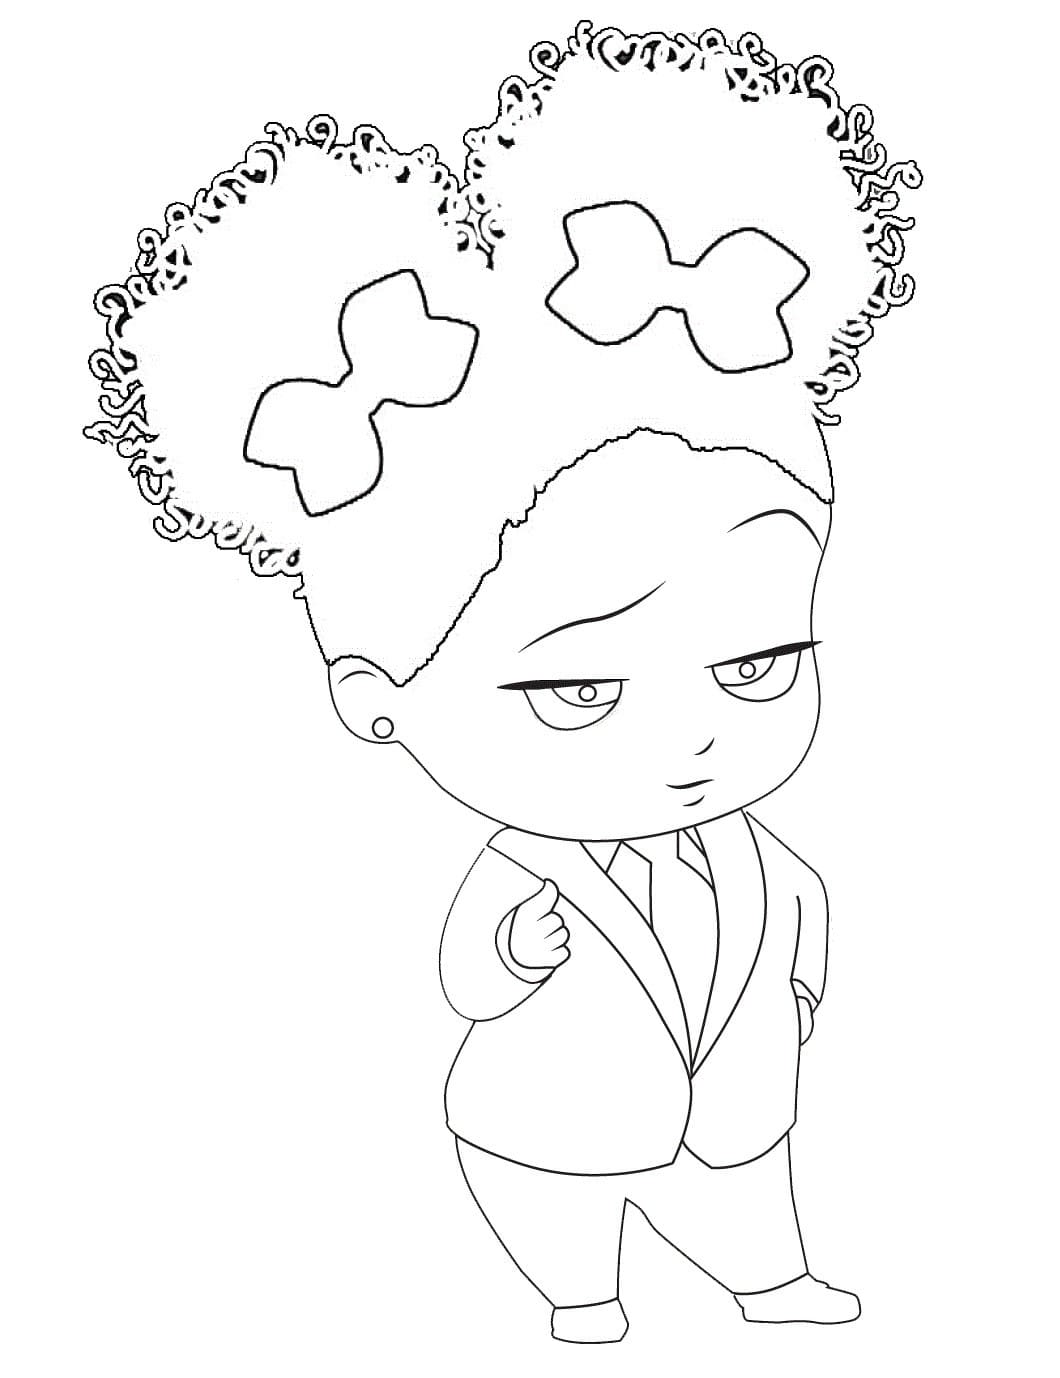 Black Baby Boss Girl Coloring Page Coloring Pages My XXX Hot Girl